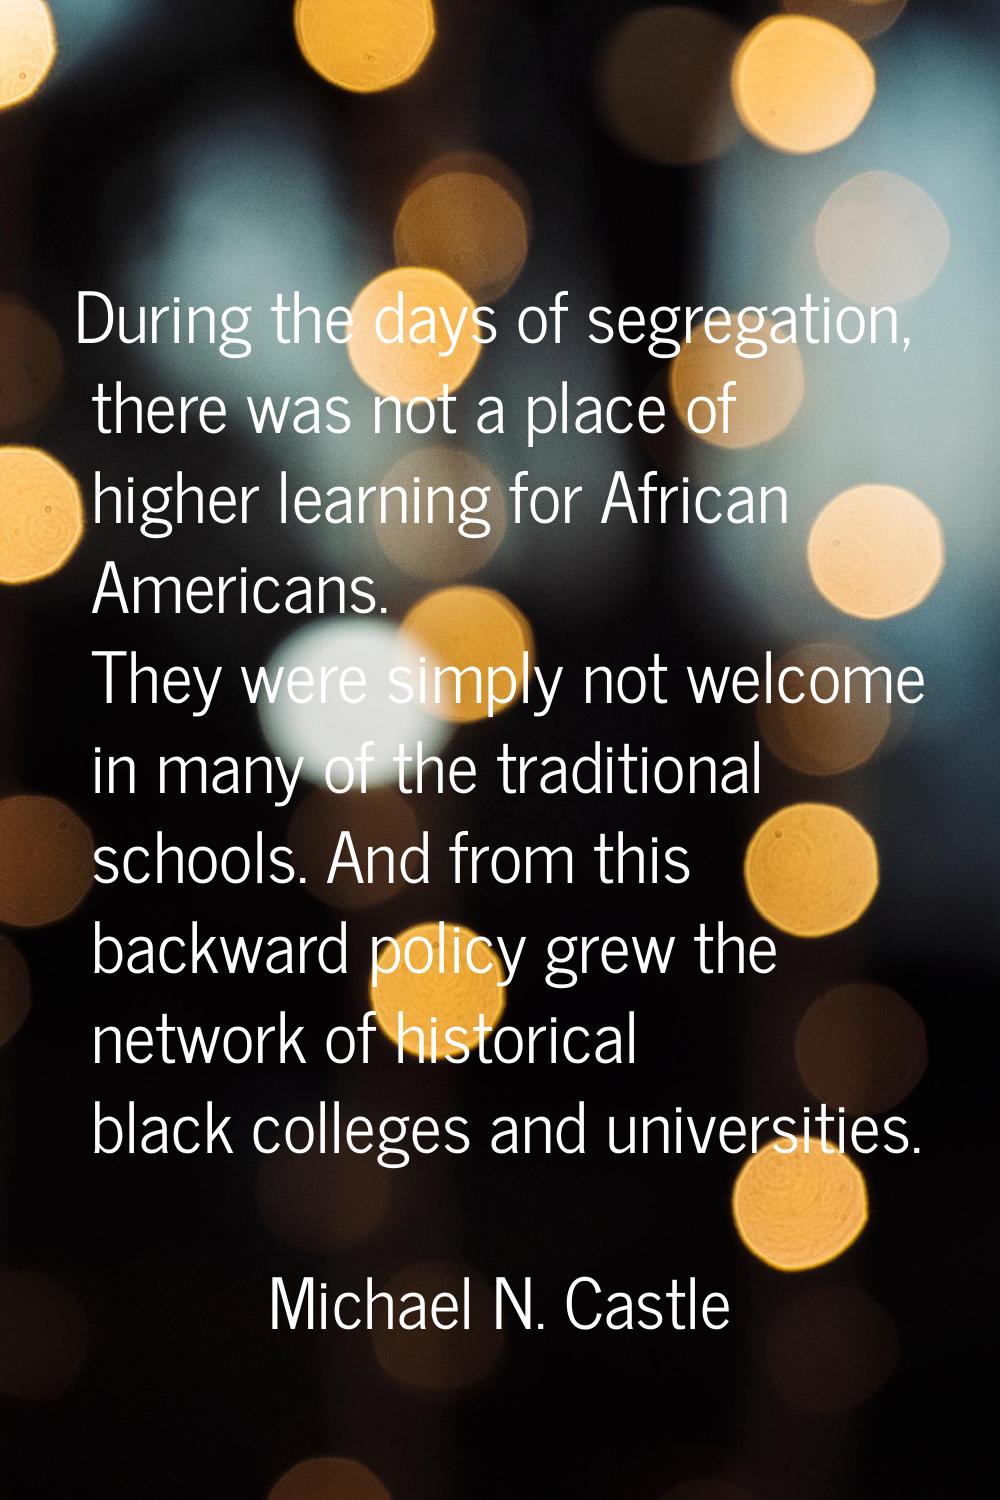 During the days of segregation, there was not a place of higher learning for African Americans. The